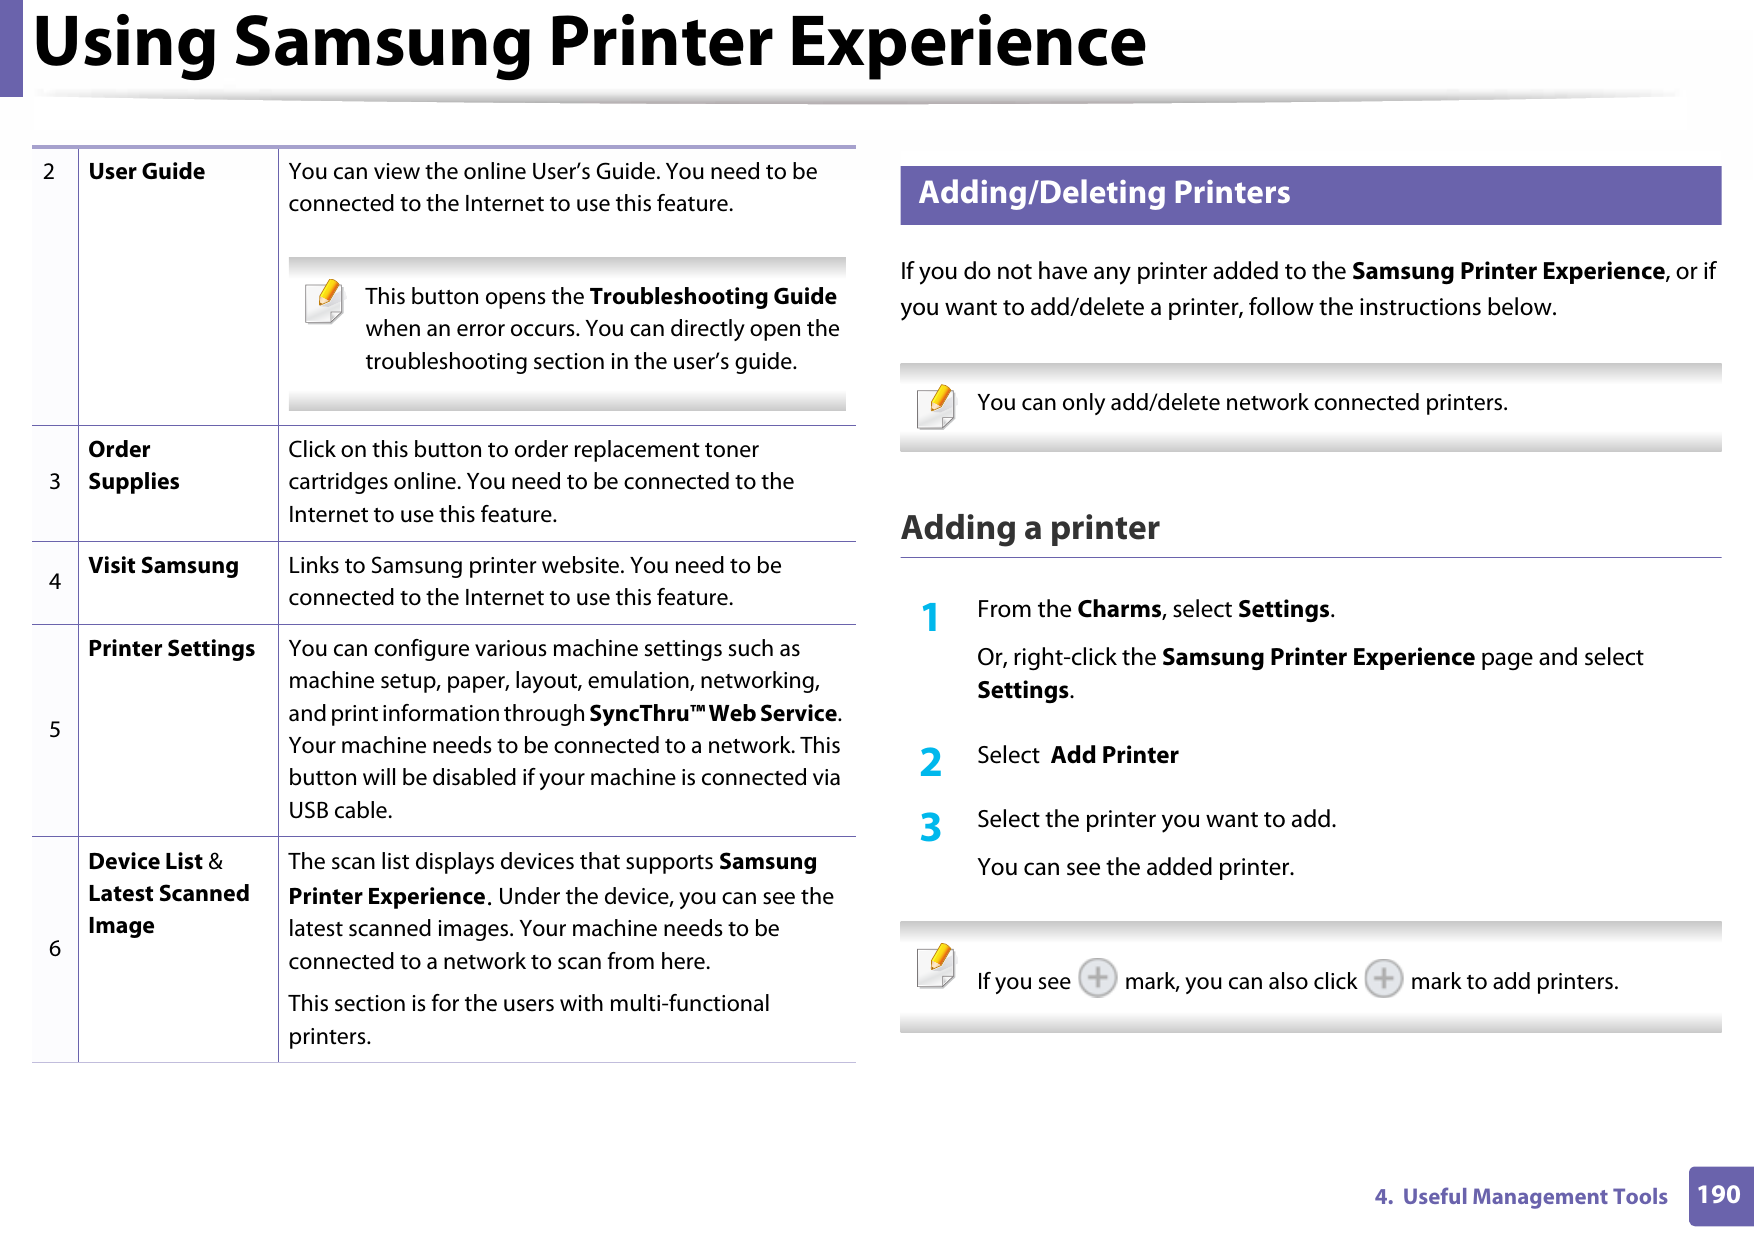 Using Samsung Printer Experience1904.  Useful Management Tools7 Adding/Deleting PrintersIf you do not have any printer added to the Samsung Printer Experience, or if you want to add/delete a printer, follow the instructions below.  You can only add/delete network connected printers. Adding a printer1From the Charms, select Settings.Or, right-click the Samsung Printer Experience page and select Settings.2  Select  Add Printer3  Select the printer you want to add.You can see the added printer. If you see   mark, you can also click   mark to add printers. 2User Guide You can view the online User’s Guide. You need to be connected to the Internet to use this feature. This button opens the Troubleshooting Guide when an error occurs. You can directly open the troubleshooting section in the user’s guide.  3Order SuppliesClick on this button to order replacement toner cartridges online. You need to be connected to the Internet to use this feature. 4Visit Samsung Links to Samsung printer website. You need to be connected to the Internet to use this feature.5Printer Settings You can configure various machine settings such as machine setup, paper, layout, emulation, networking, and print information through SyncThru™ Web Service. Your machine needs to be connected to a network. This button will be disabled if your machine is connected via USB cable.6Device List &amp; Latest Scanned ImageThe scan list displays devices that supports Samsung Printer Experience. Under the device, you can see the latest scanned images. Your machine needs to be connected to a network to scan from here. This section is for the users with multi-functional printers.